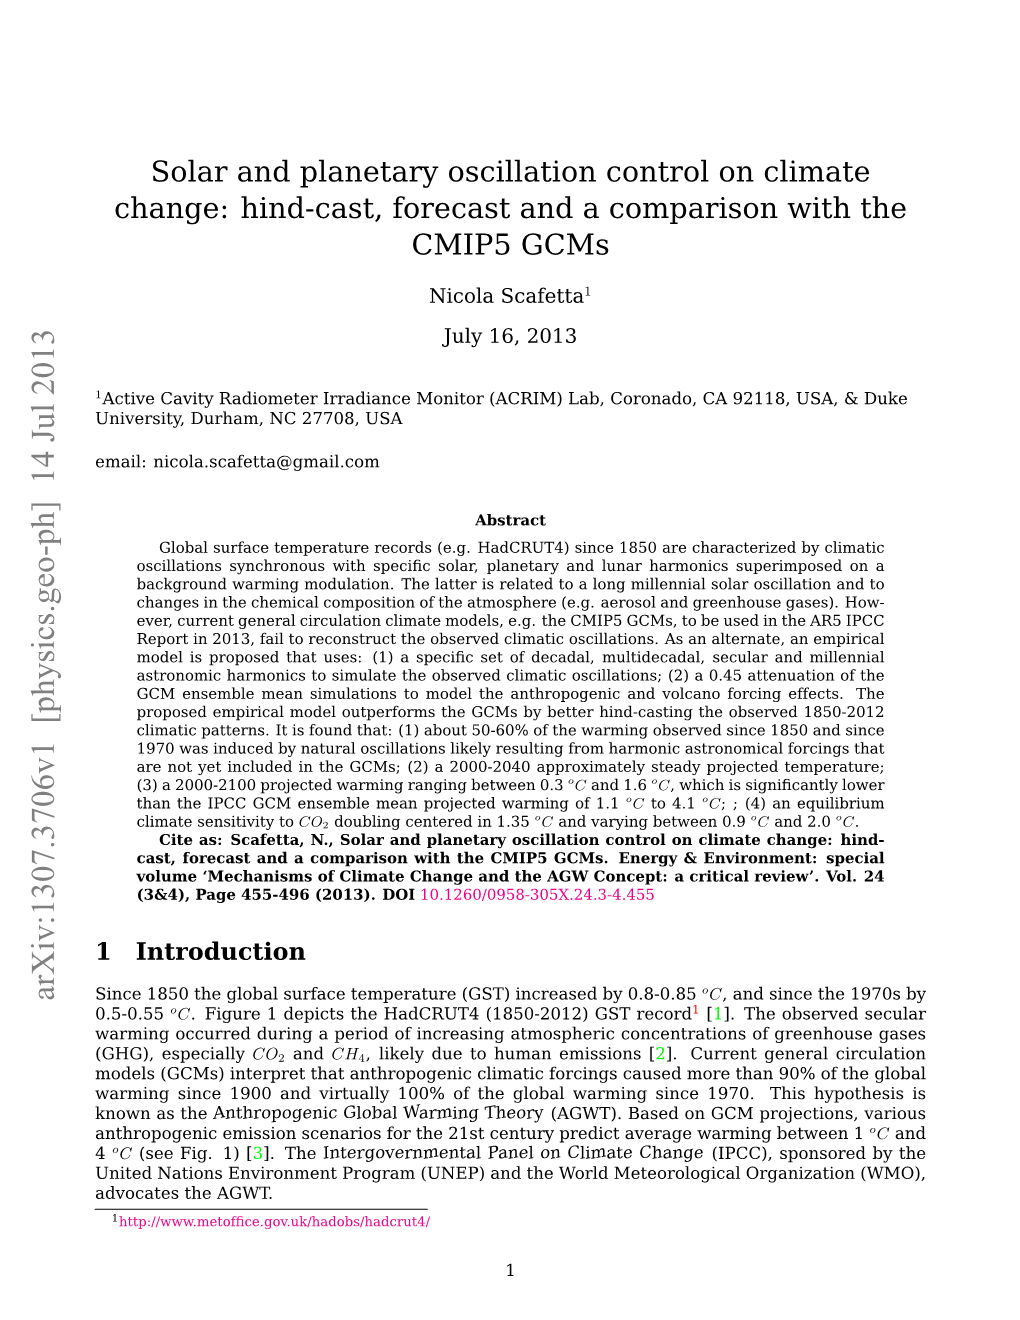 Solar and Planetary Oscillation Control on Climate Change: Hind-Cast, Forecast and a Comparison with the CMIP5 Gcms